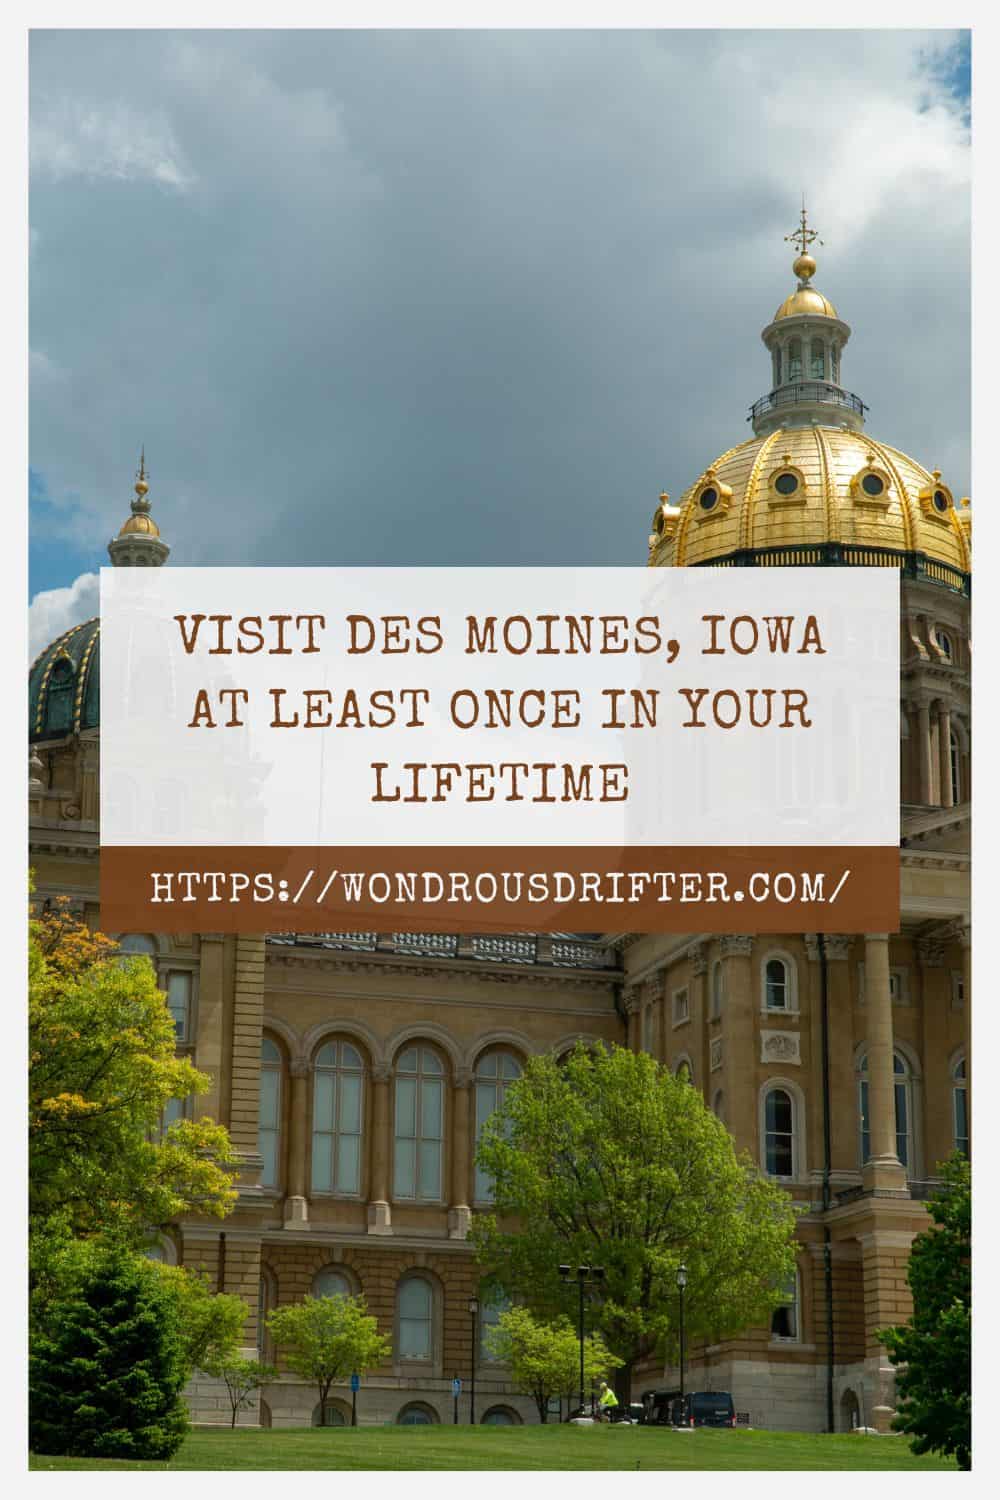 Visit Des Moines Iowa at least once in your lifetime